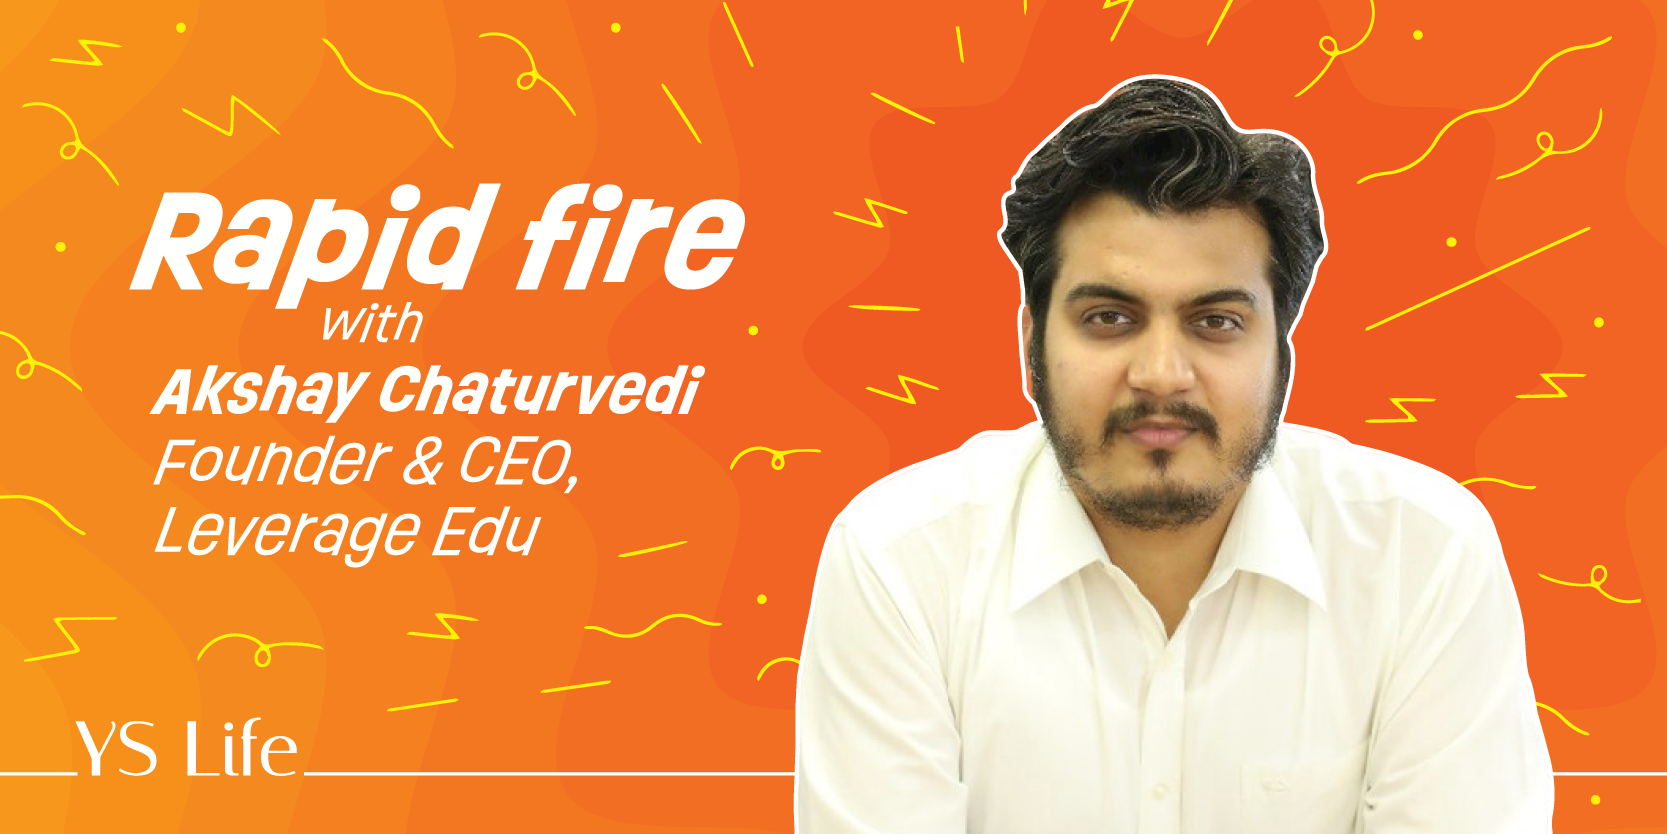 Rapid fire with YS Life: Akshay Chaturvedi, CEO and Founder, Leverage Edu